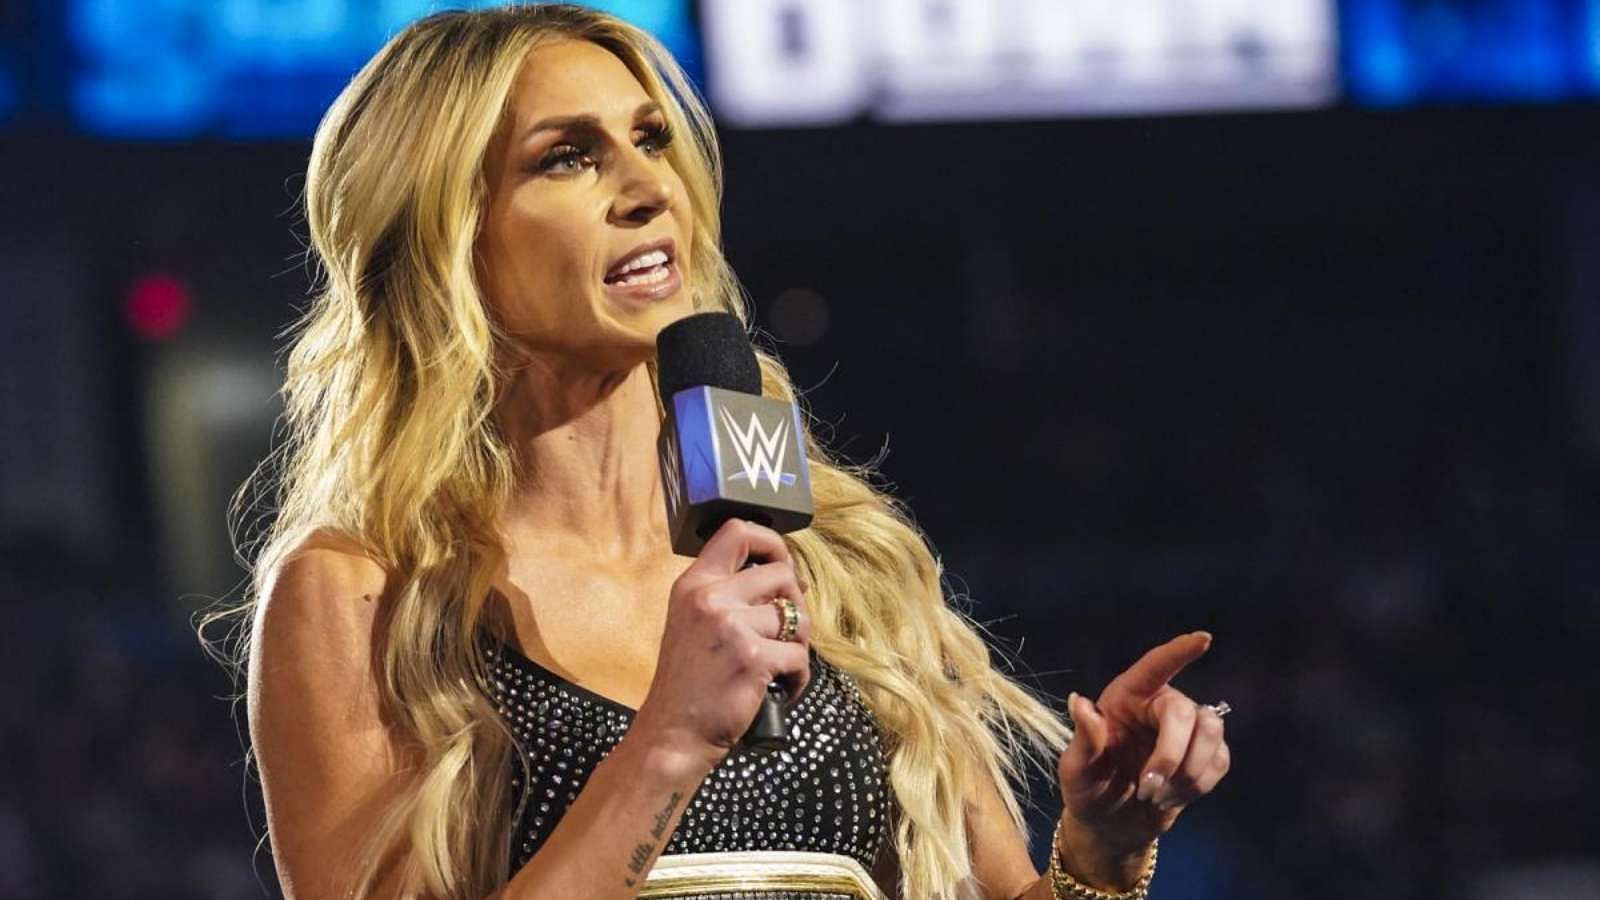 Will history repeat itself for Flair at the Show of Shows?